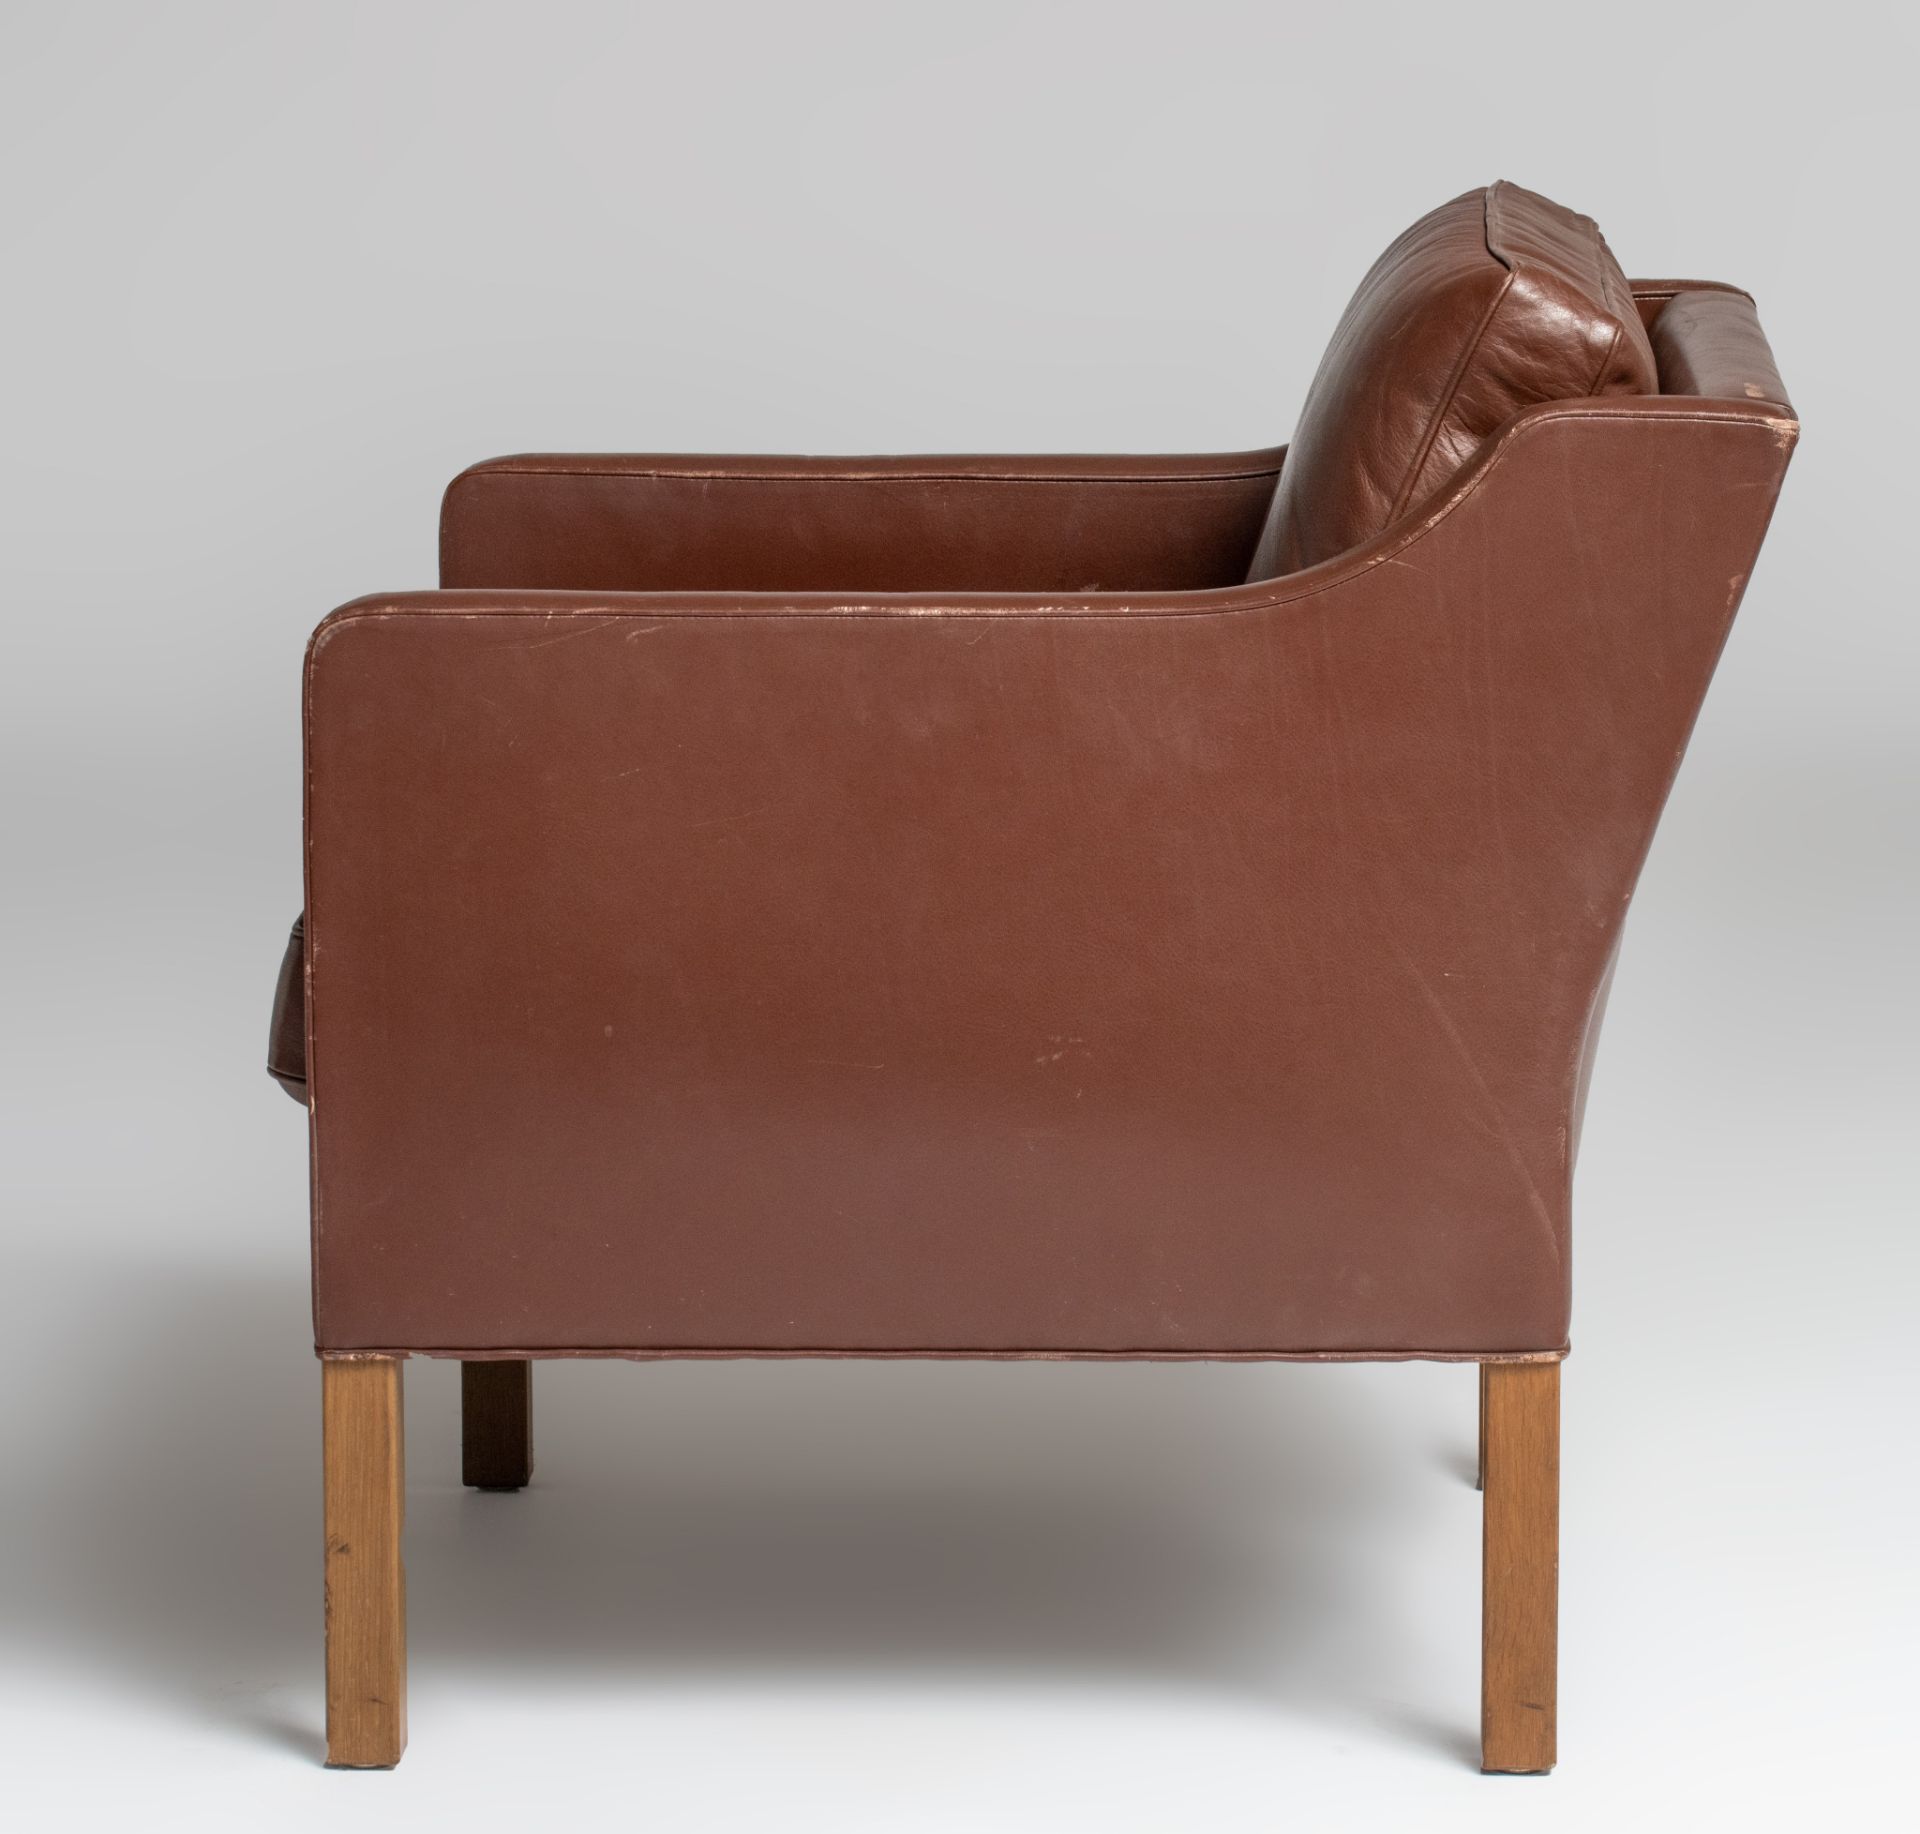 A brown leather armchair by Borge Mogensen for Ed Fredericia Stolefabrik, 1970, H 75 - W 71 cm - Image 5 of 13